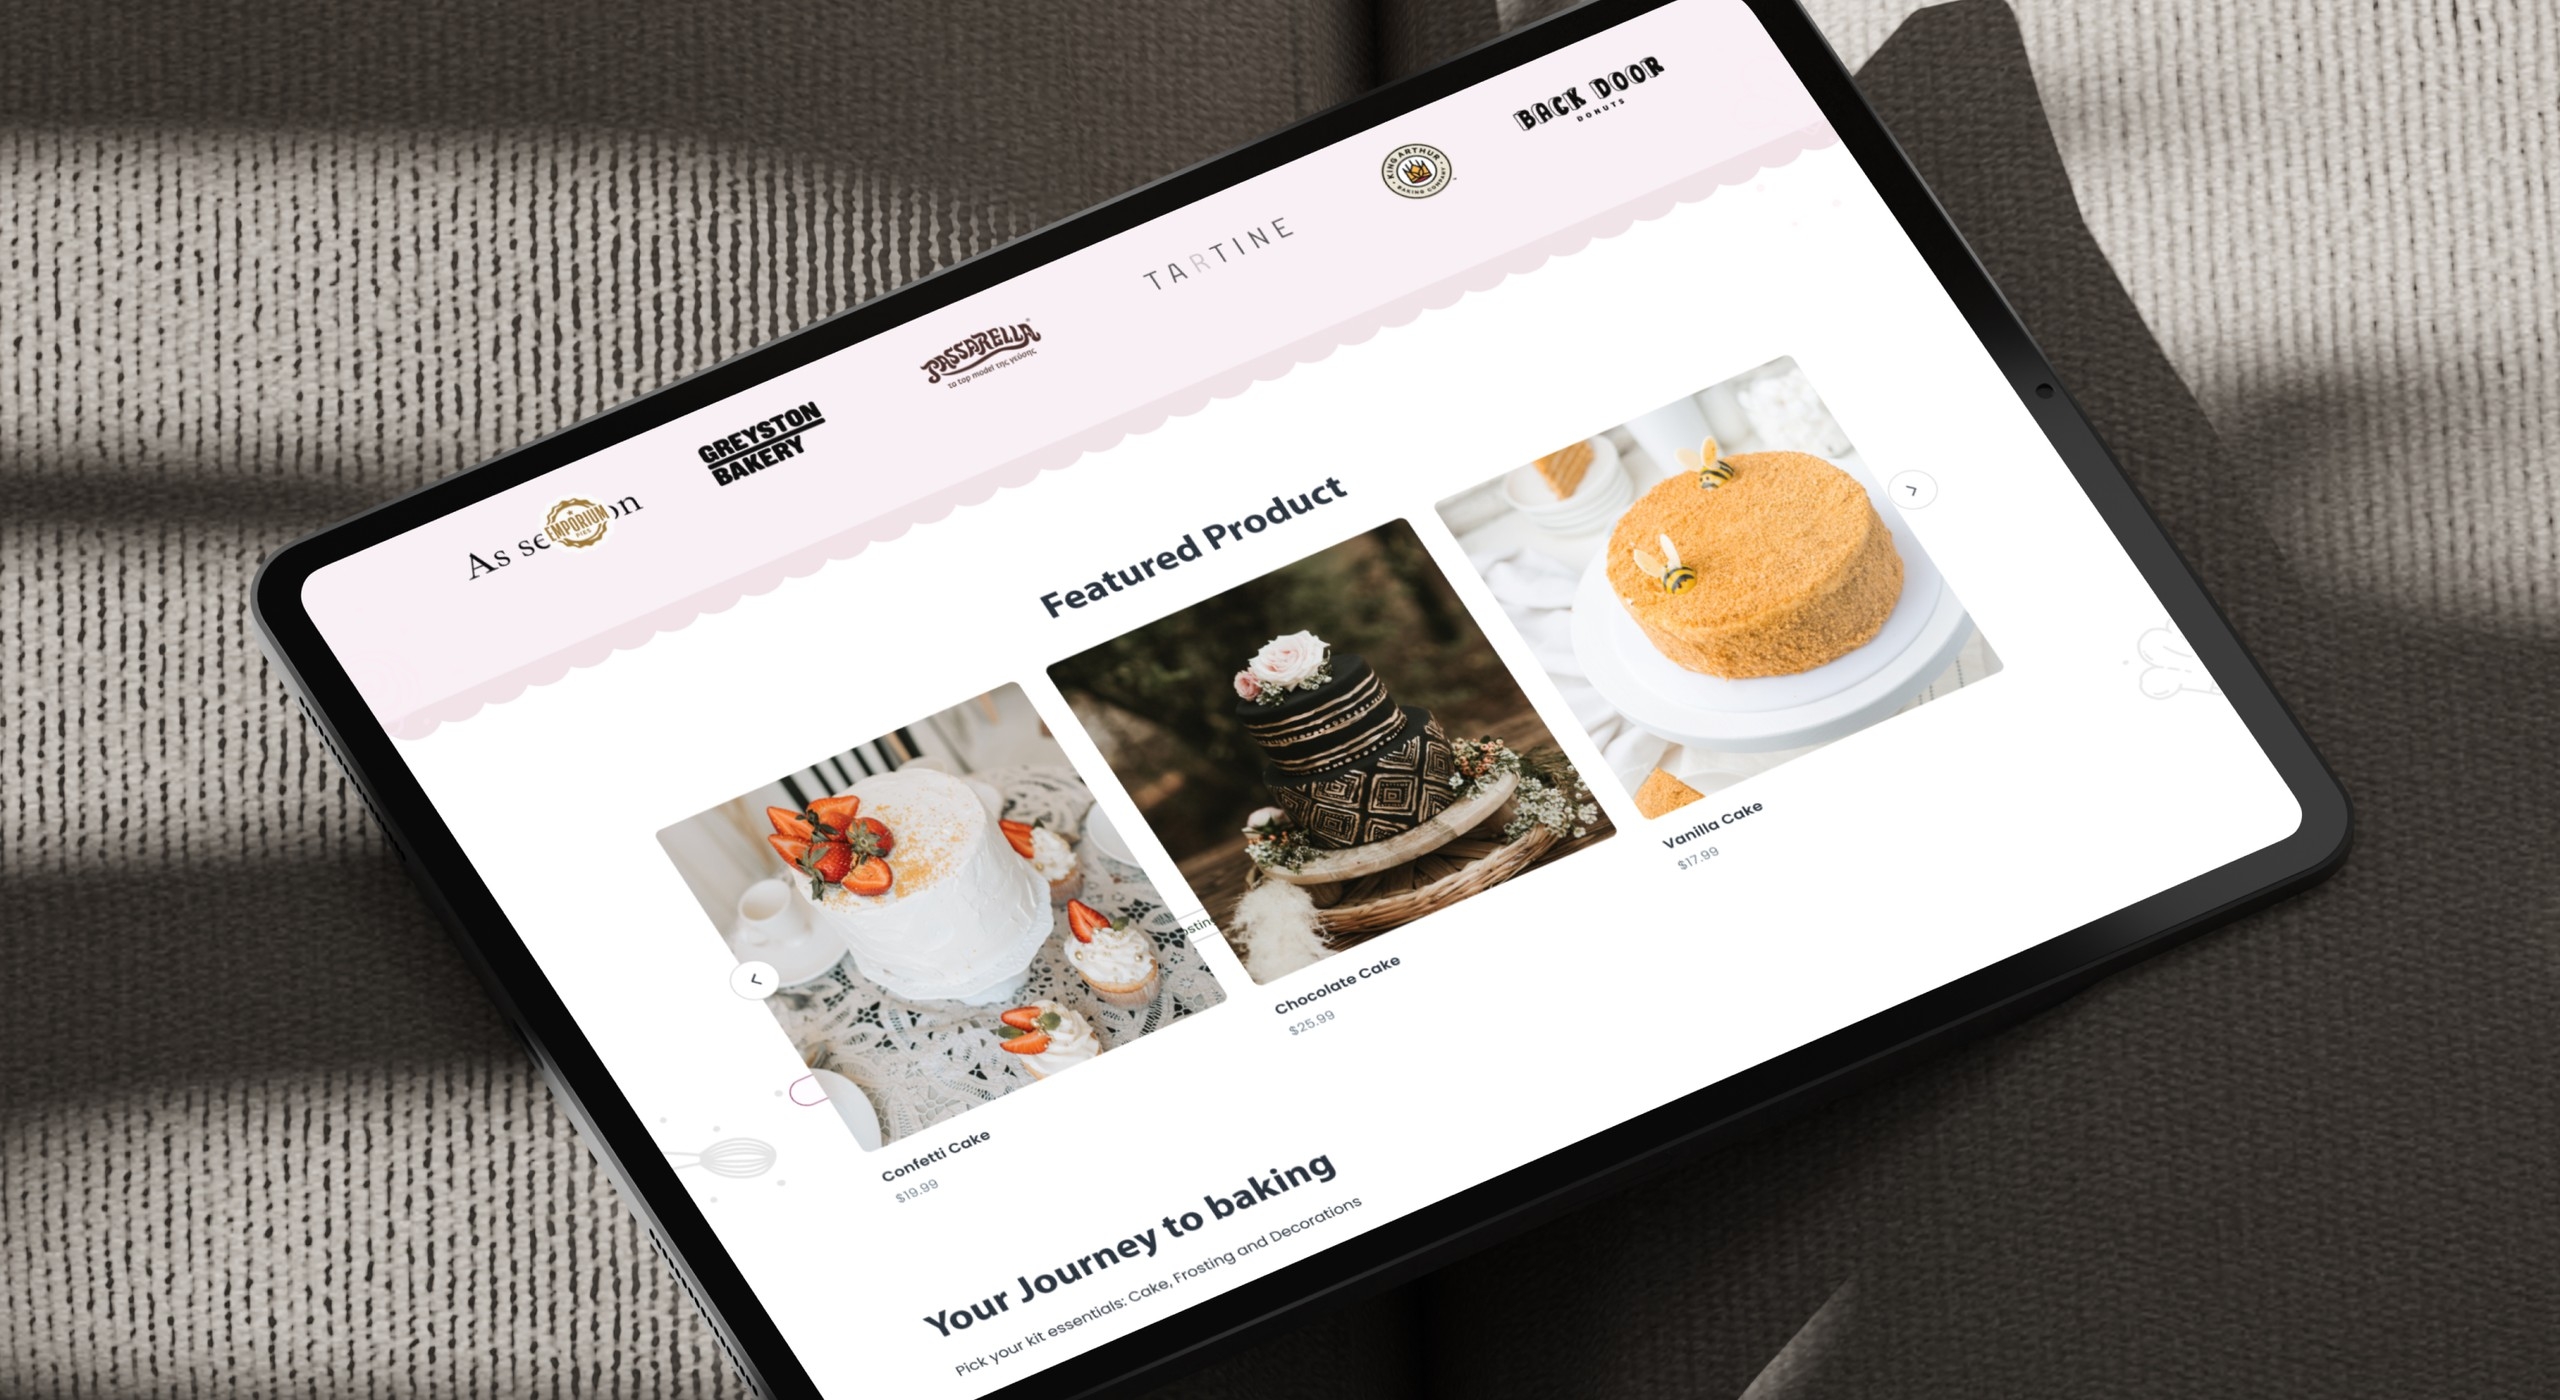 Magento Commerce Ecommerce Store Damask Cakes Featured Product Page